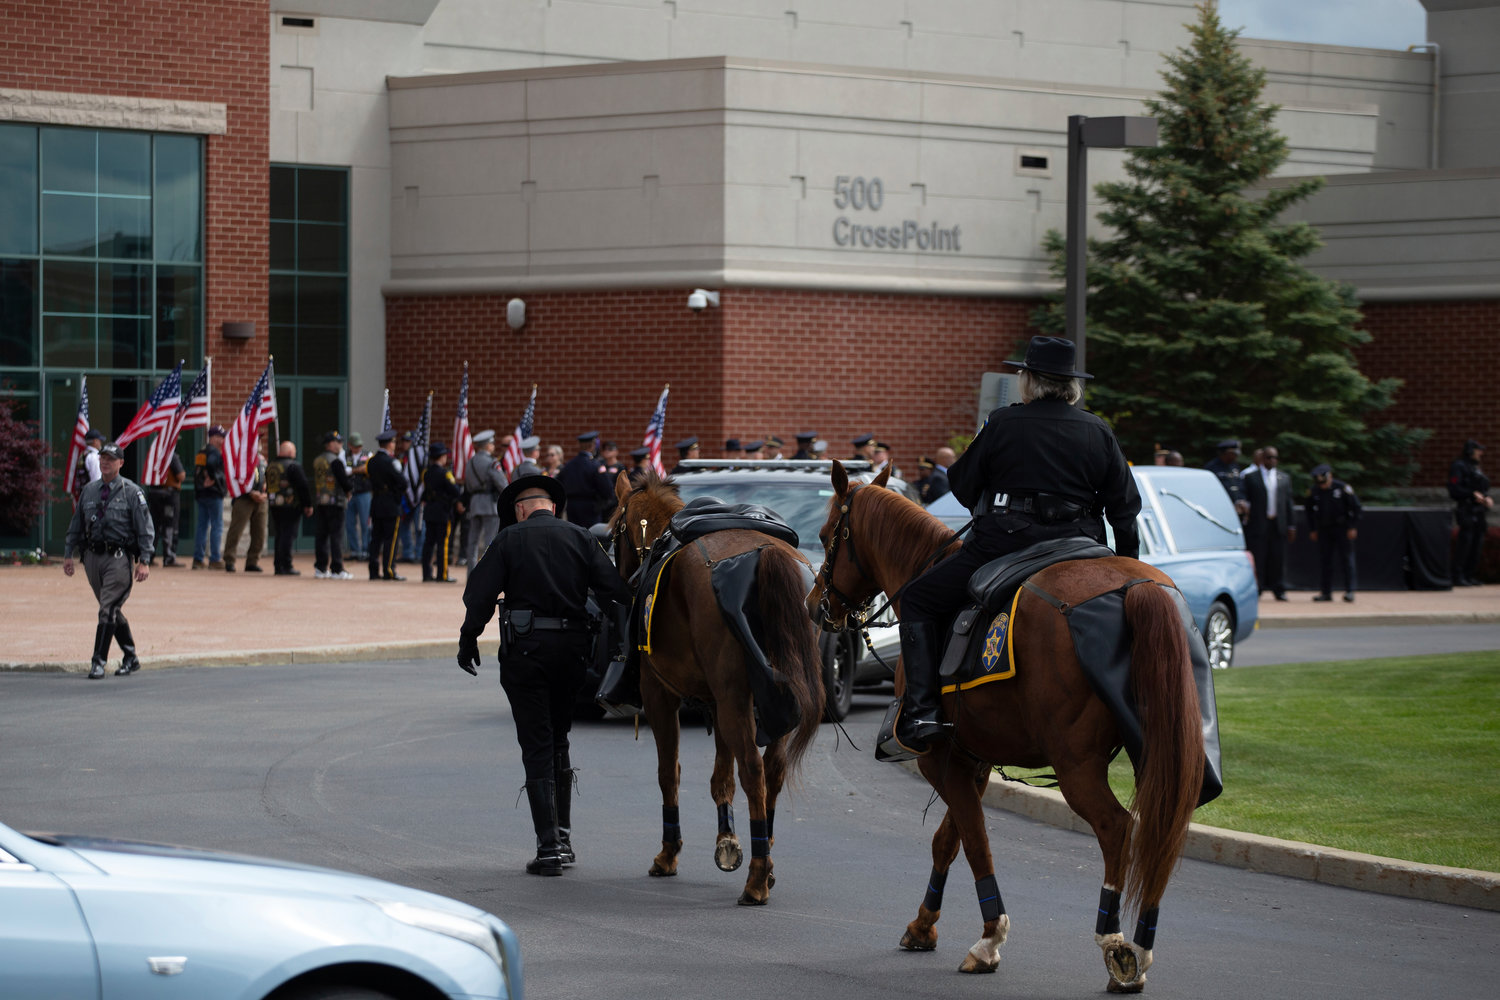 Capt. Wayne Wolfe, center, and Lt. Ruby Davis-Joseph, right, with the Erie County Sheriff's Mounted Reserve Unit, leads a riderless horse before the funeral service for Aaron Salter Jr. at The Chapel at Crosspoint on Wednesday, May 25, 2022, in Getzville, N.Y.. Salter Jr. was killed in the Buffalo supermarket shooting on May 14. (AP Photo/Joshua Bessex)